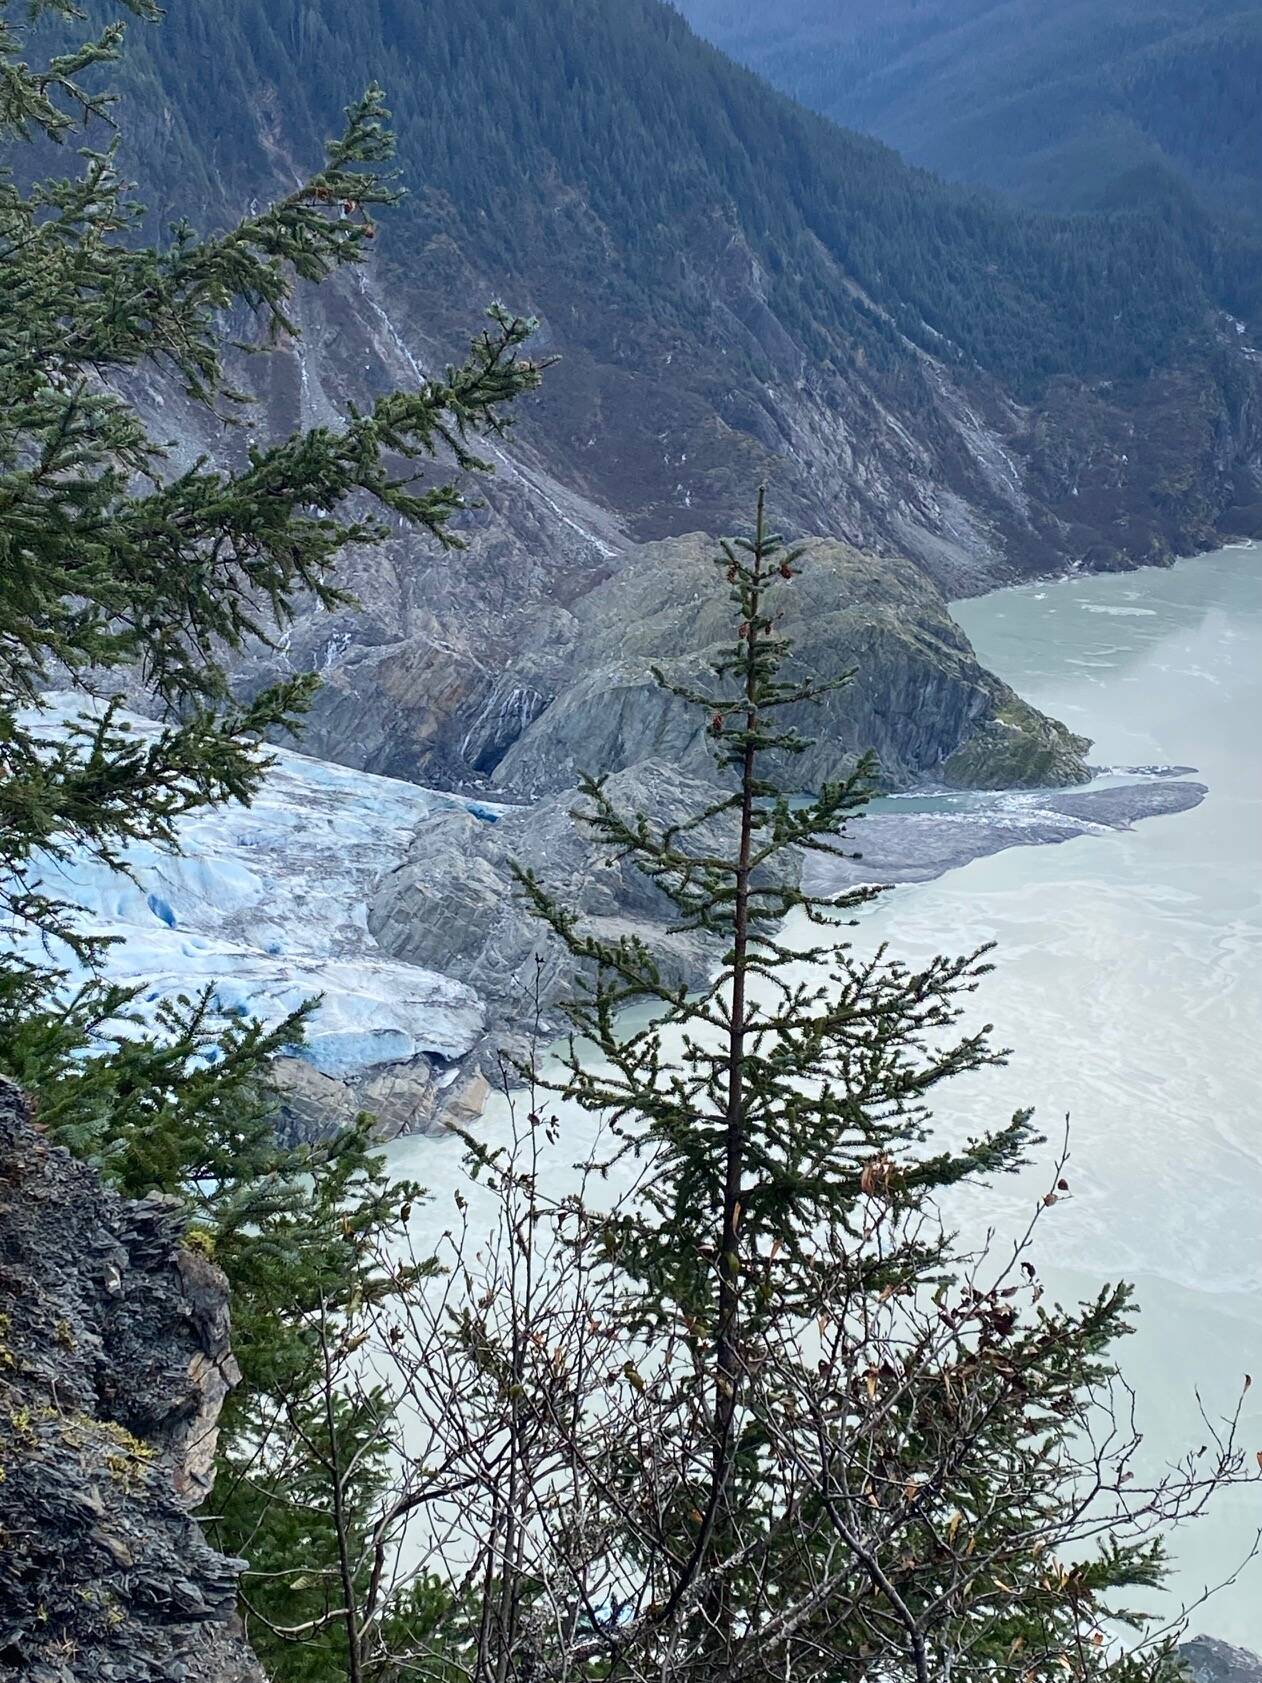 The rapidly receding Mendenhall Glacier on Oct. 18. (Photo by Denise Carroll)